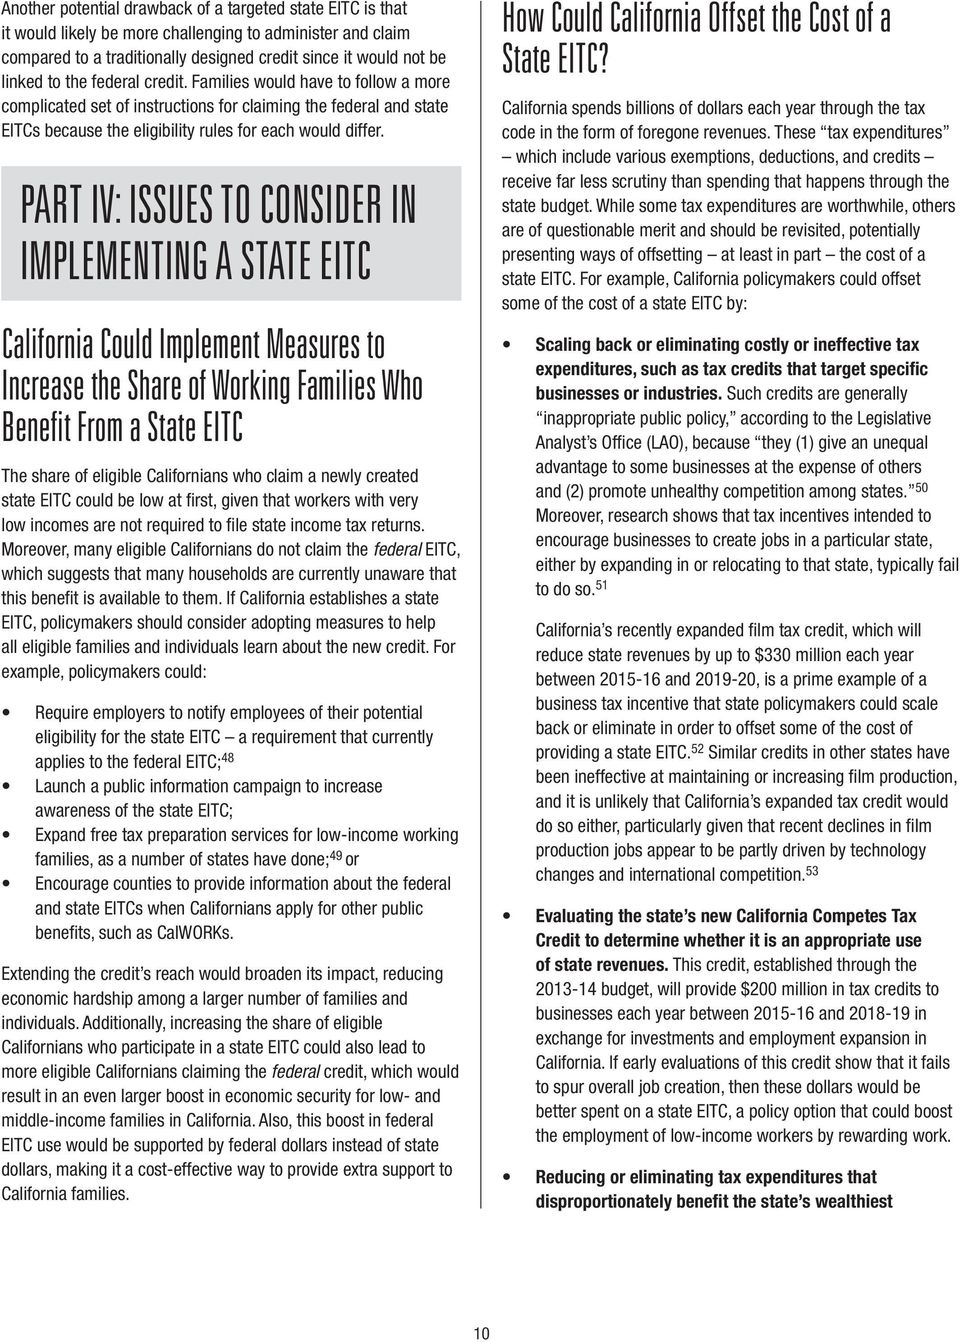 PART IV: ISSUES TO CONSIDER IN IMPLEMENTING A STATE EITC California Could Implement Measures to Increase the Share of Working Families Who Benefit From a State EITC The share of eligible Californians